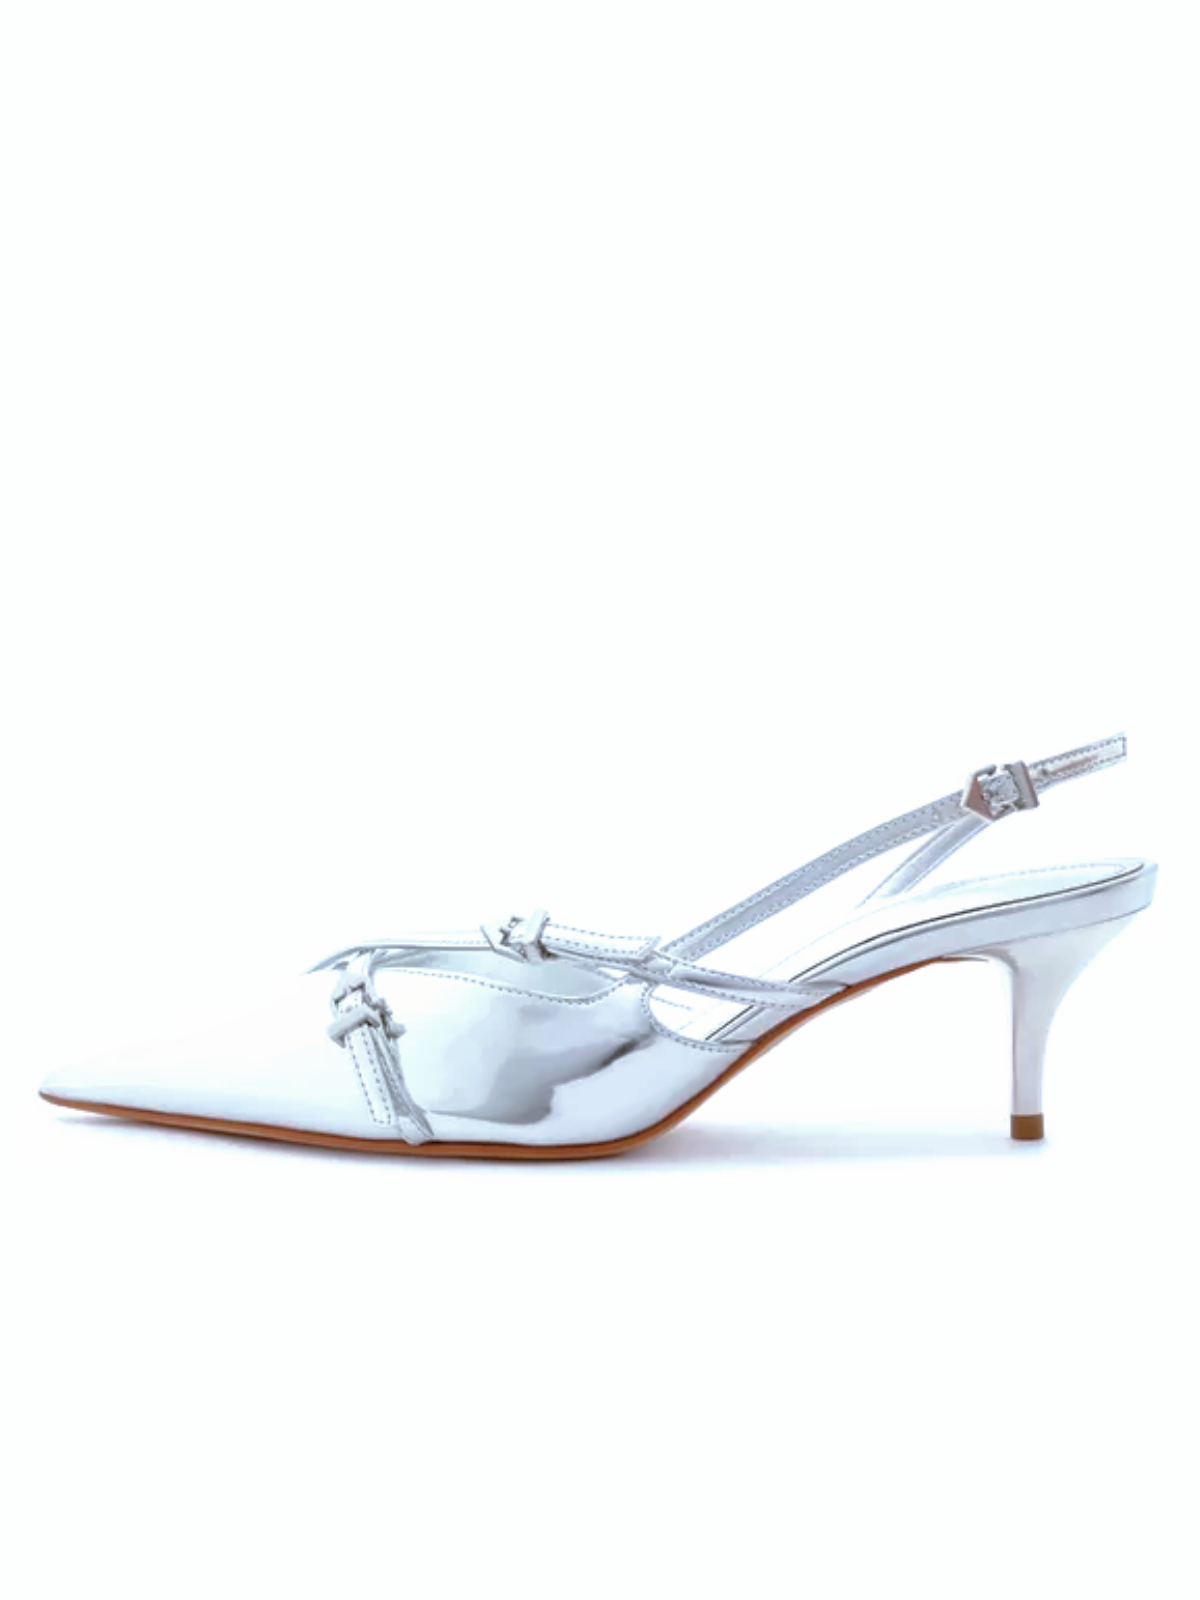 Metallic Silver Kitten Heels Slingback Courts Pumps With Crossed Buckled Strap